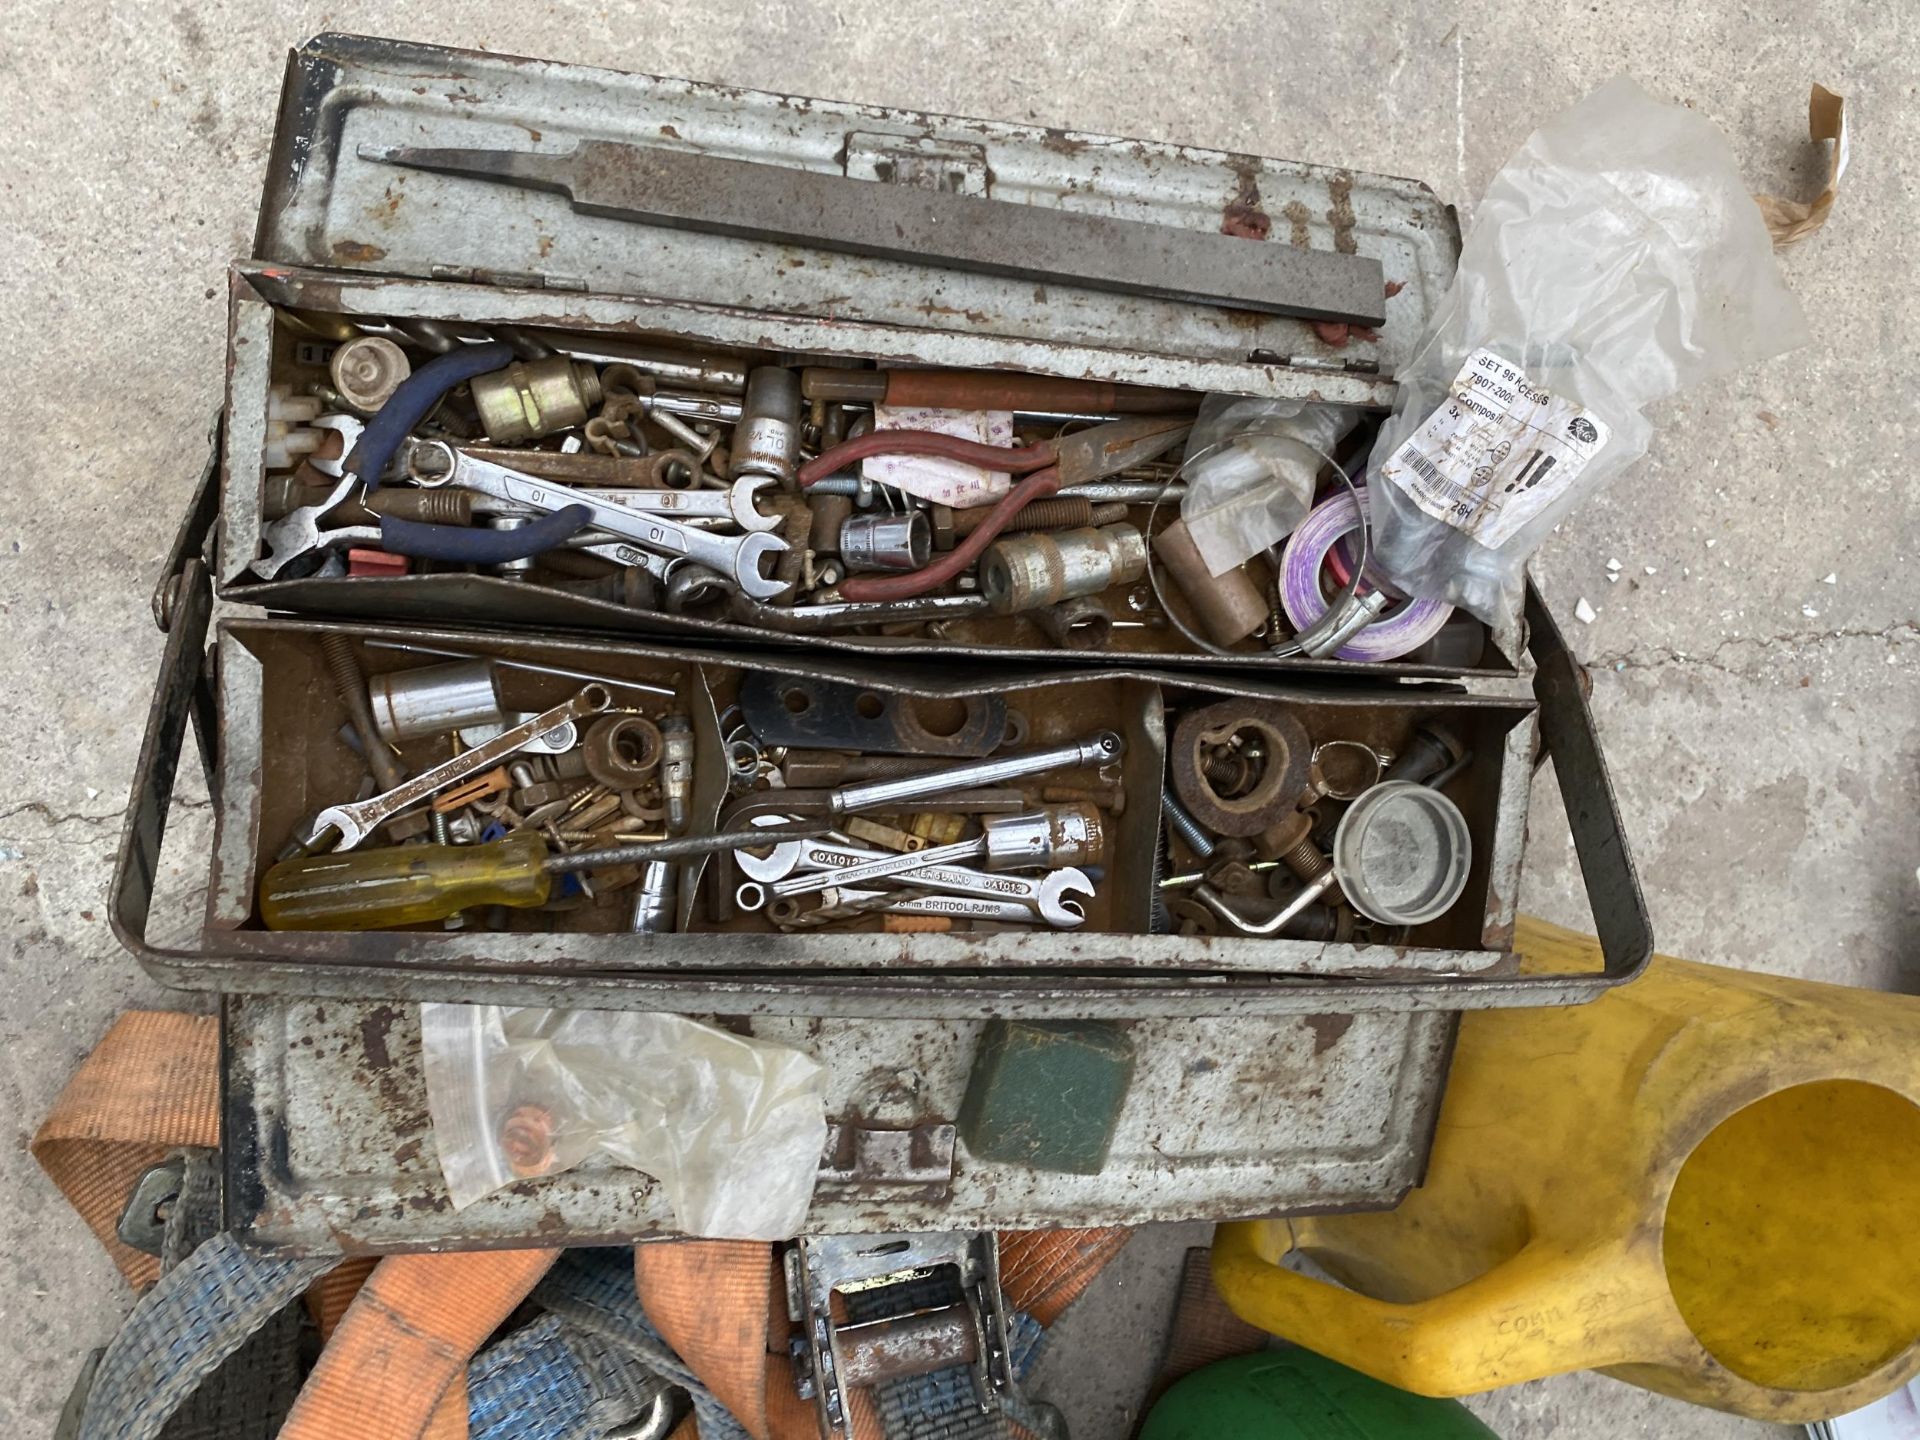 AN ASSORTMENT OF ITEMS TO INCLUDE RATCHET STRAPS AND A TOOL BOX CONTAINING AN ASSORTMENT OF TOOLS - Image 3 of 4